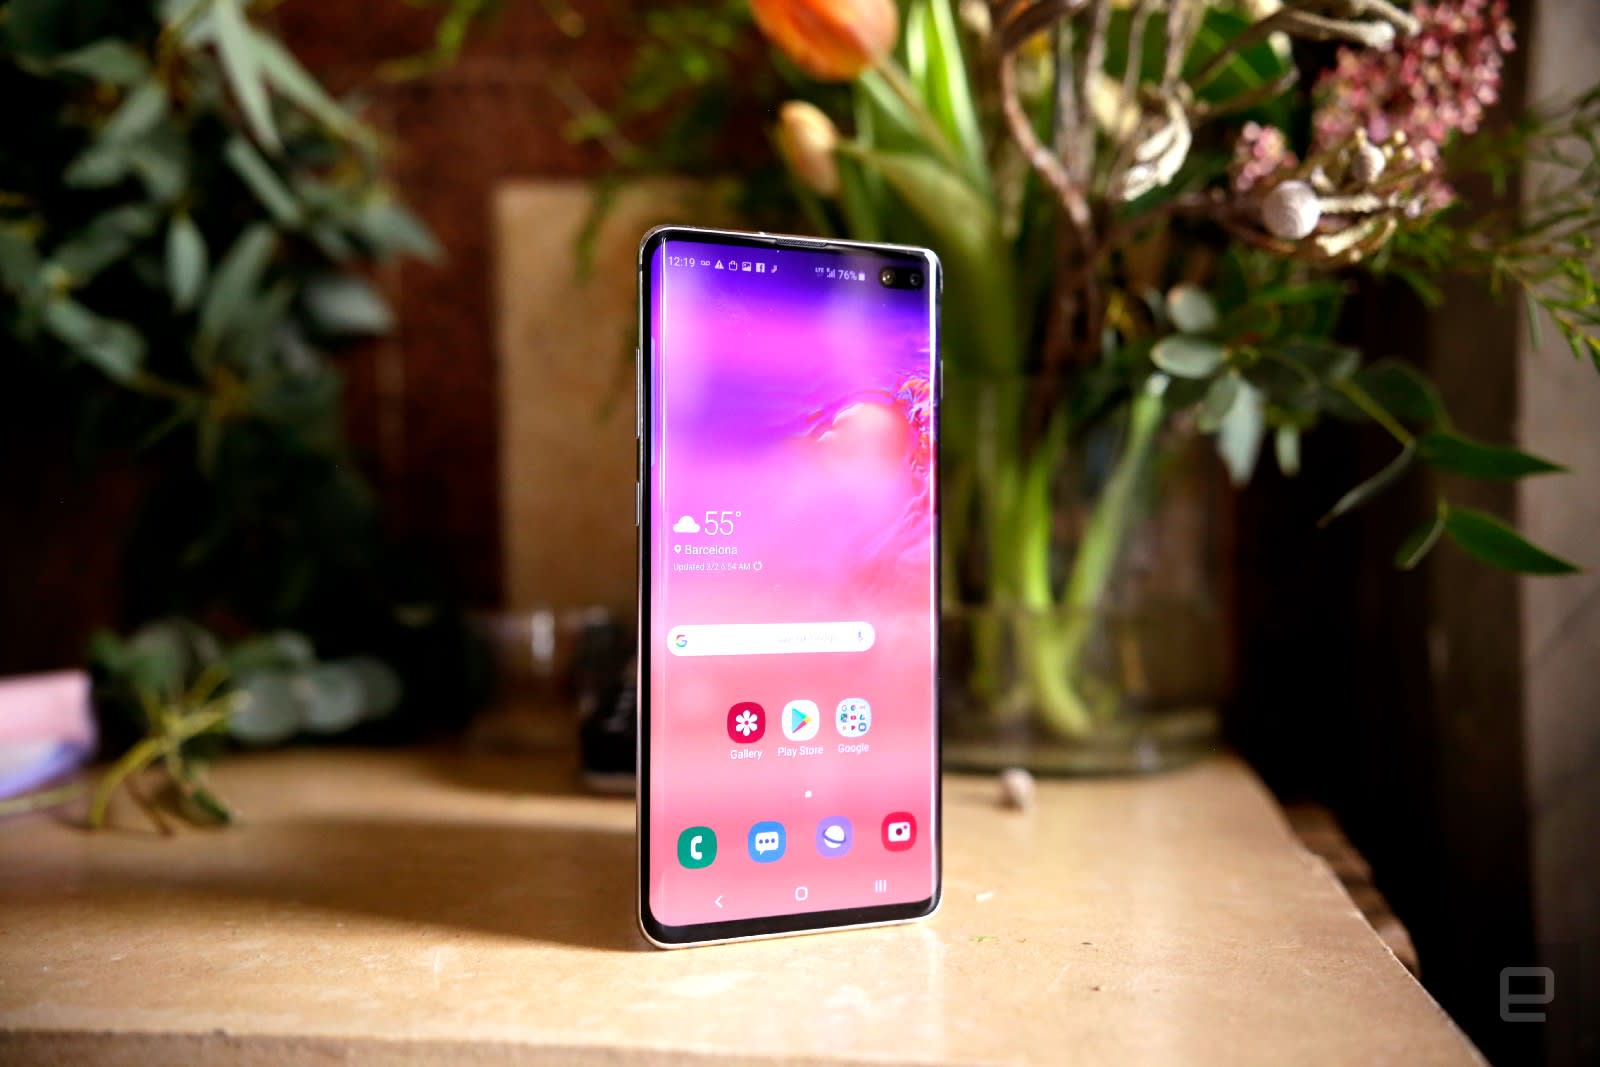 Samsung Galaxy S10 Plus Review: Milestone Before The Next Phase